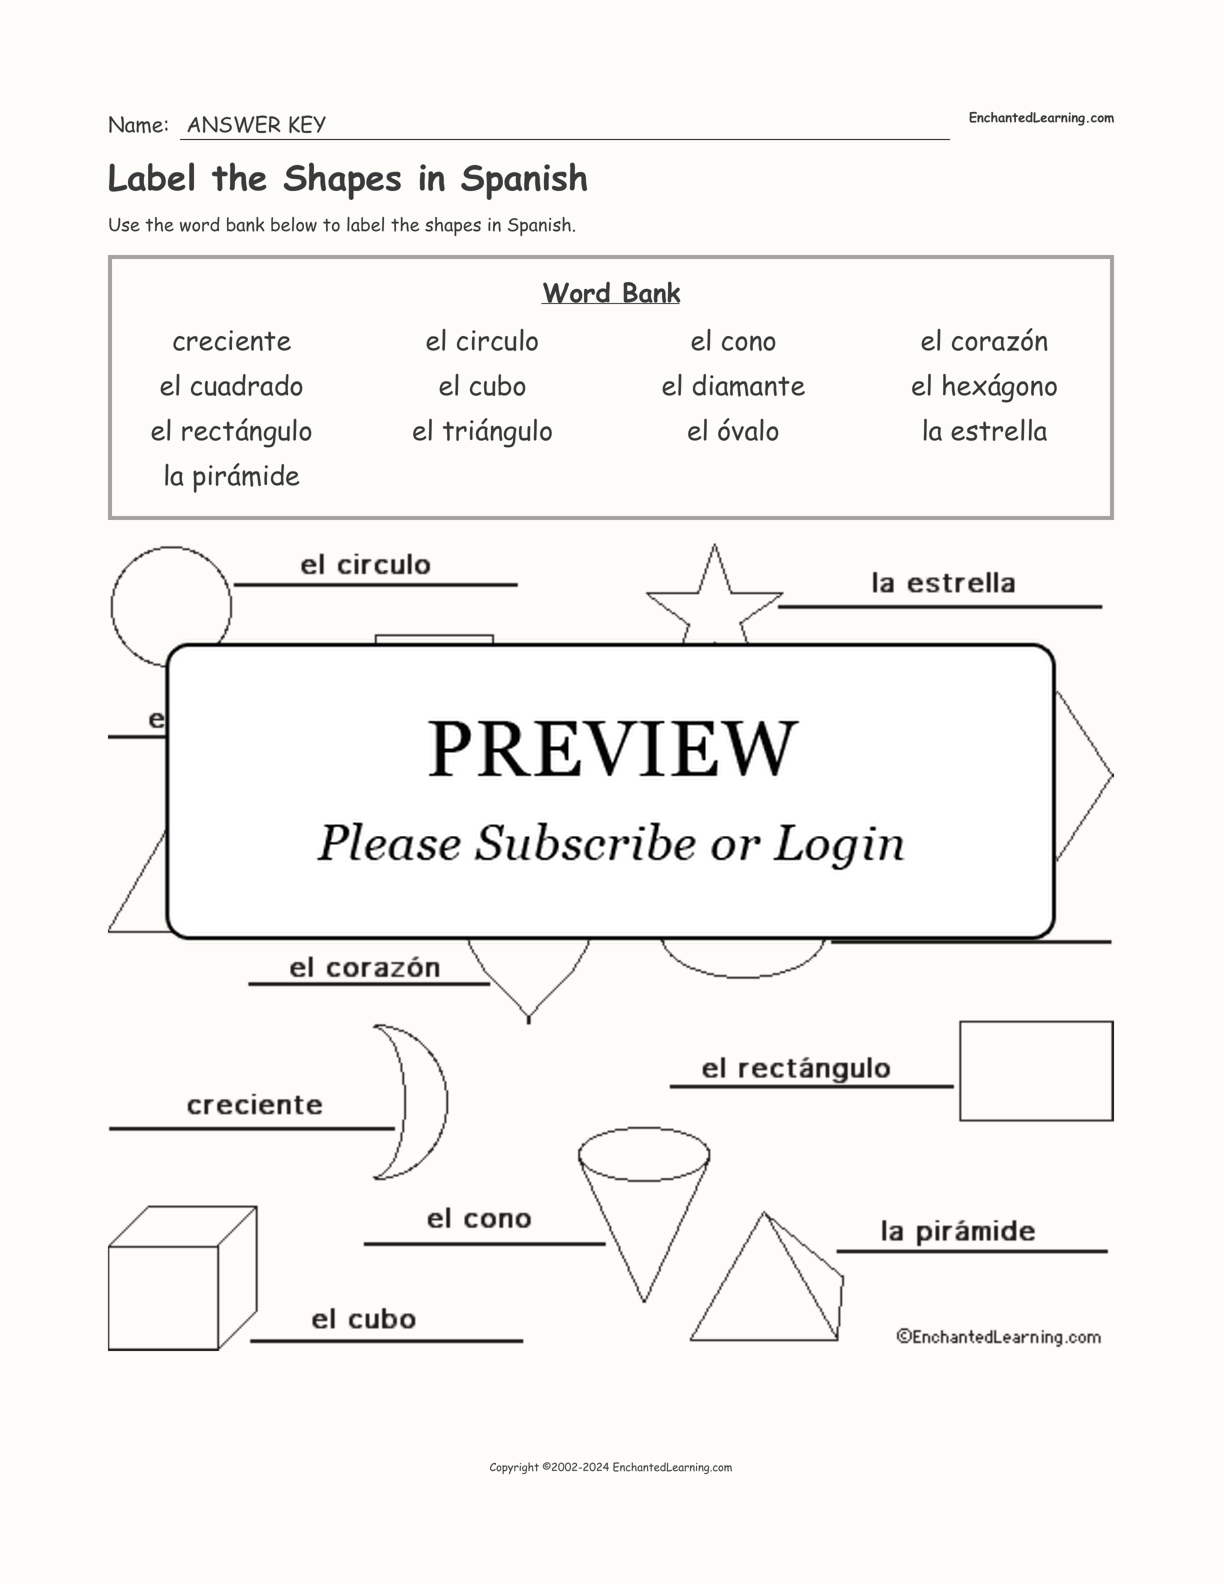 Label the Shapes in Spanish interactive worksheet page 2